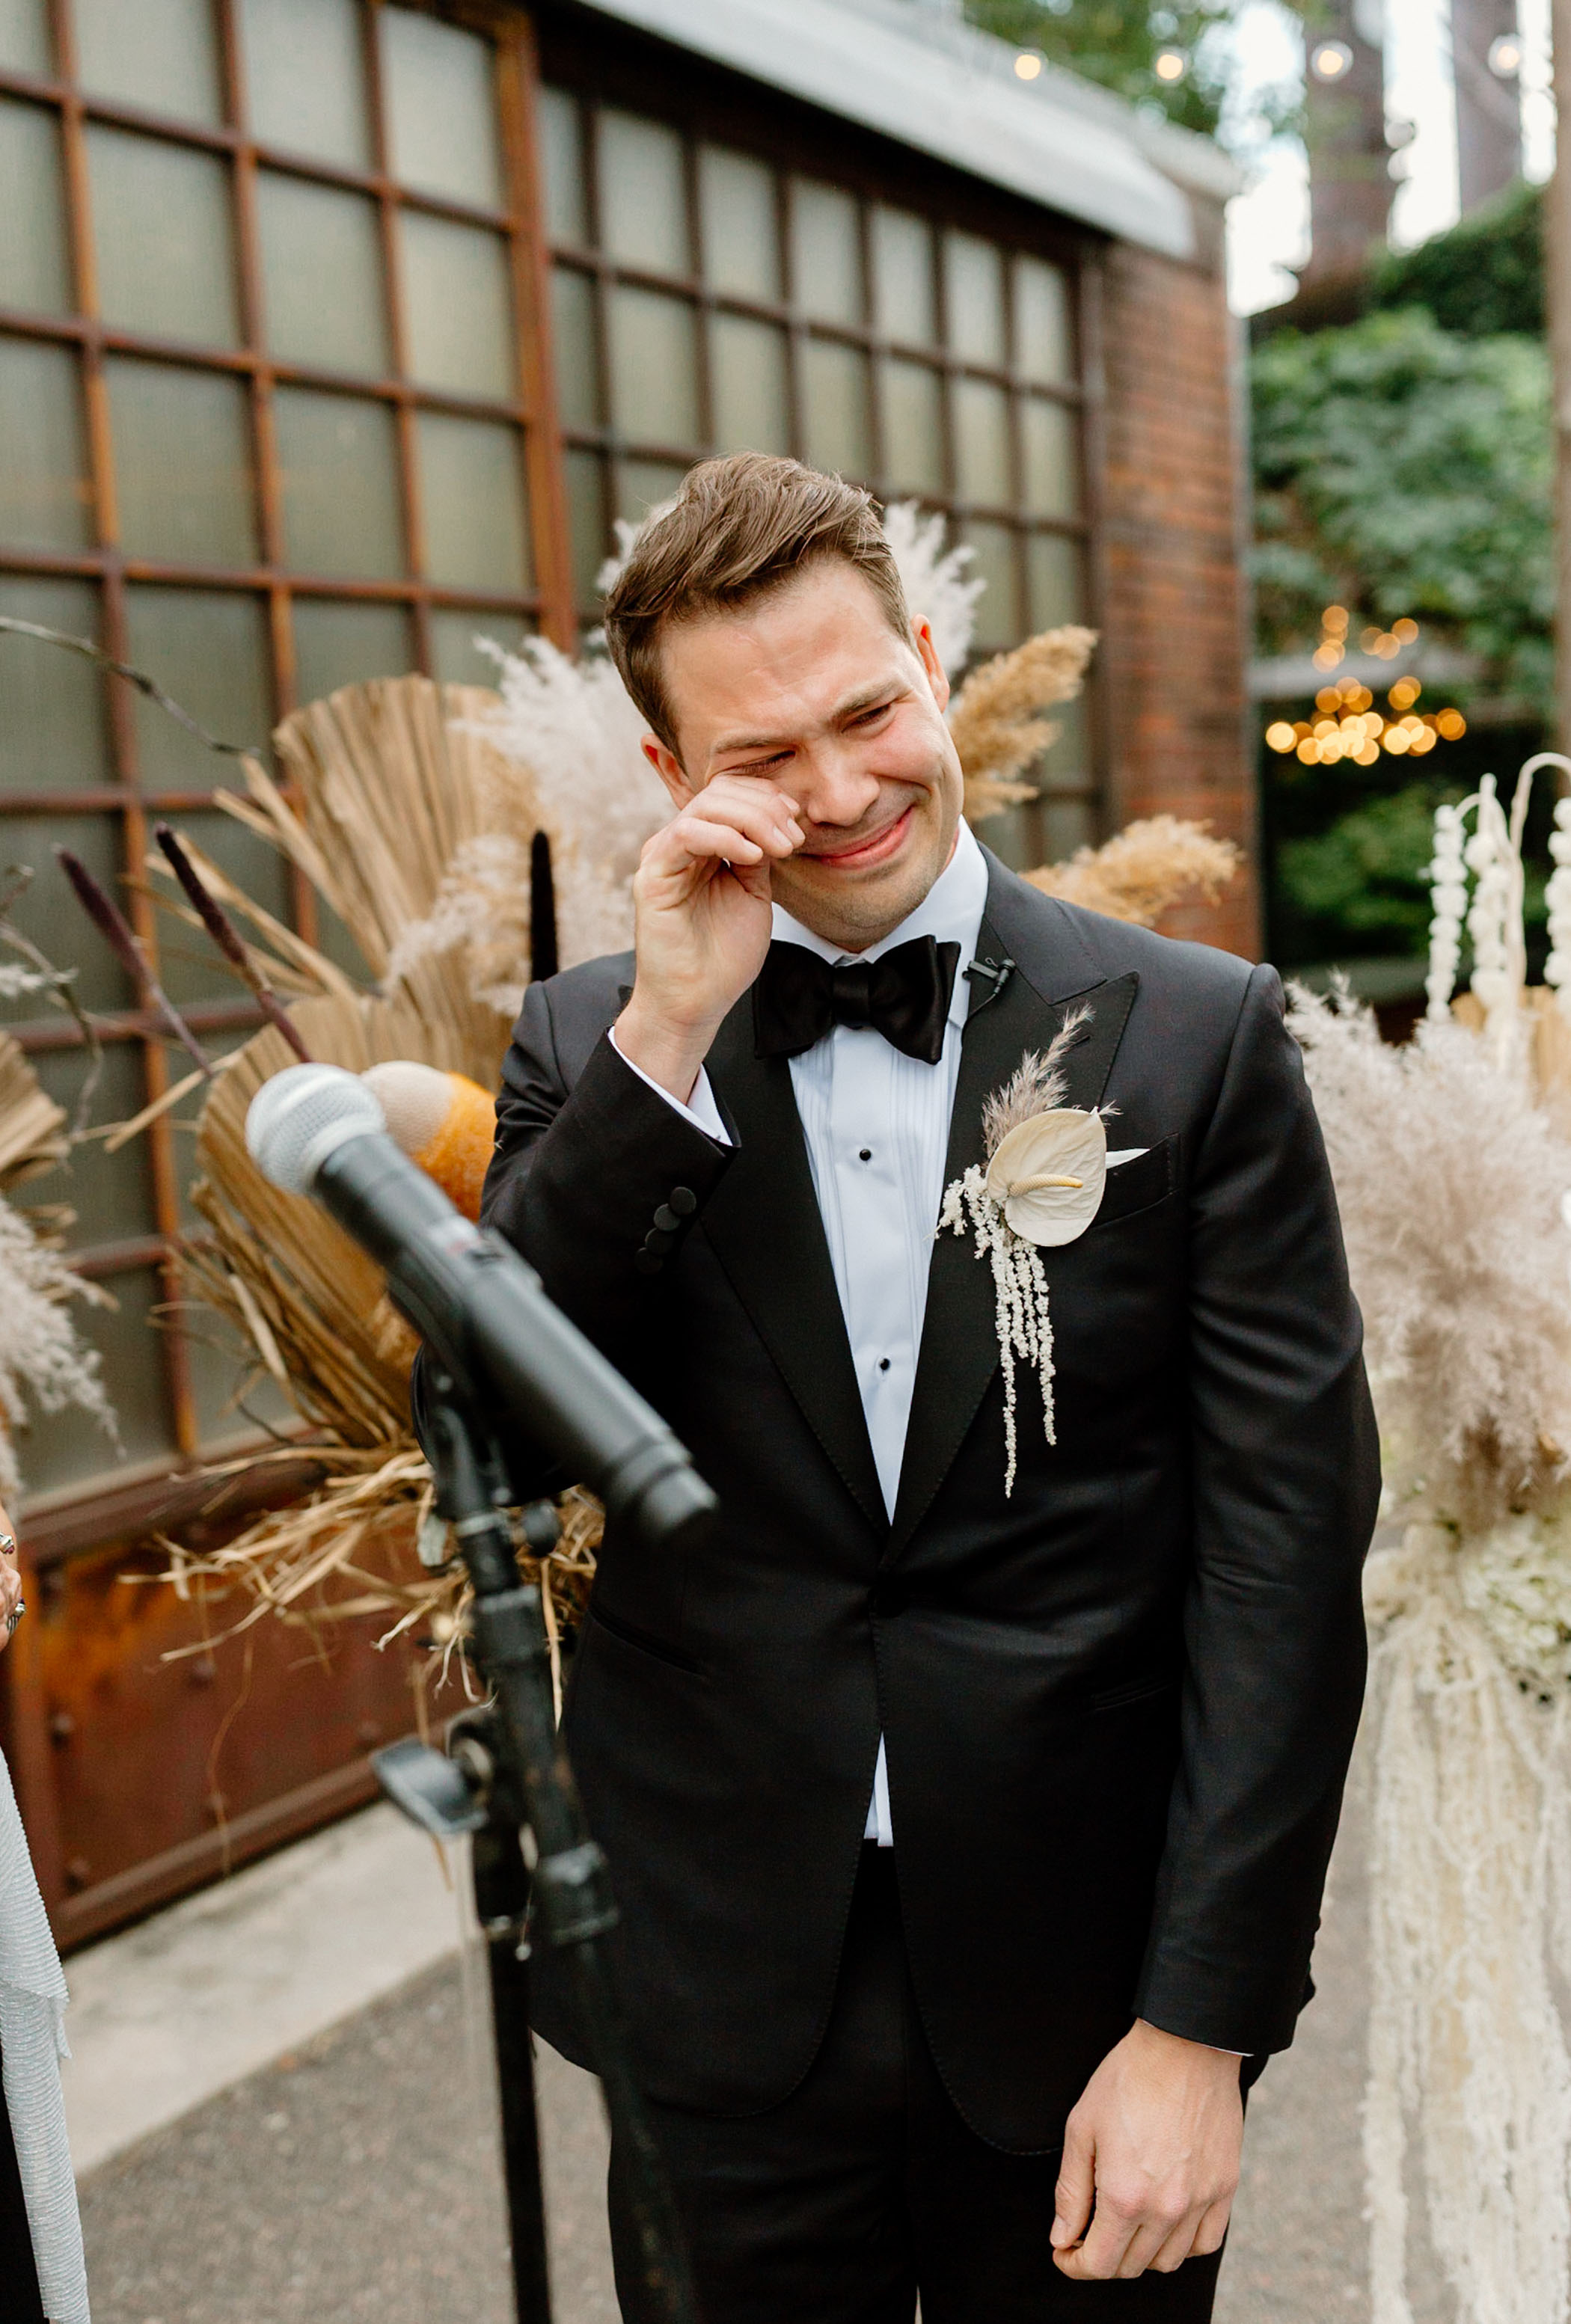 Groom crying seeing his bride for the first time